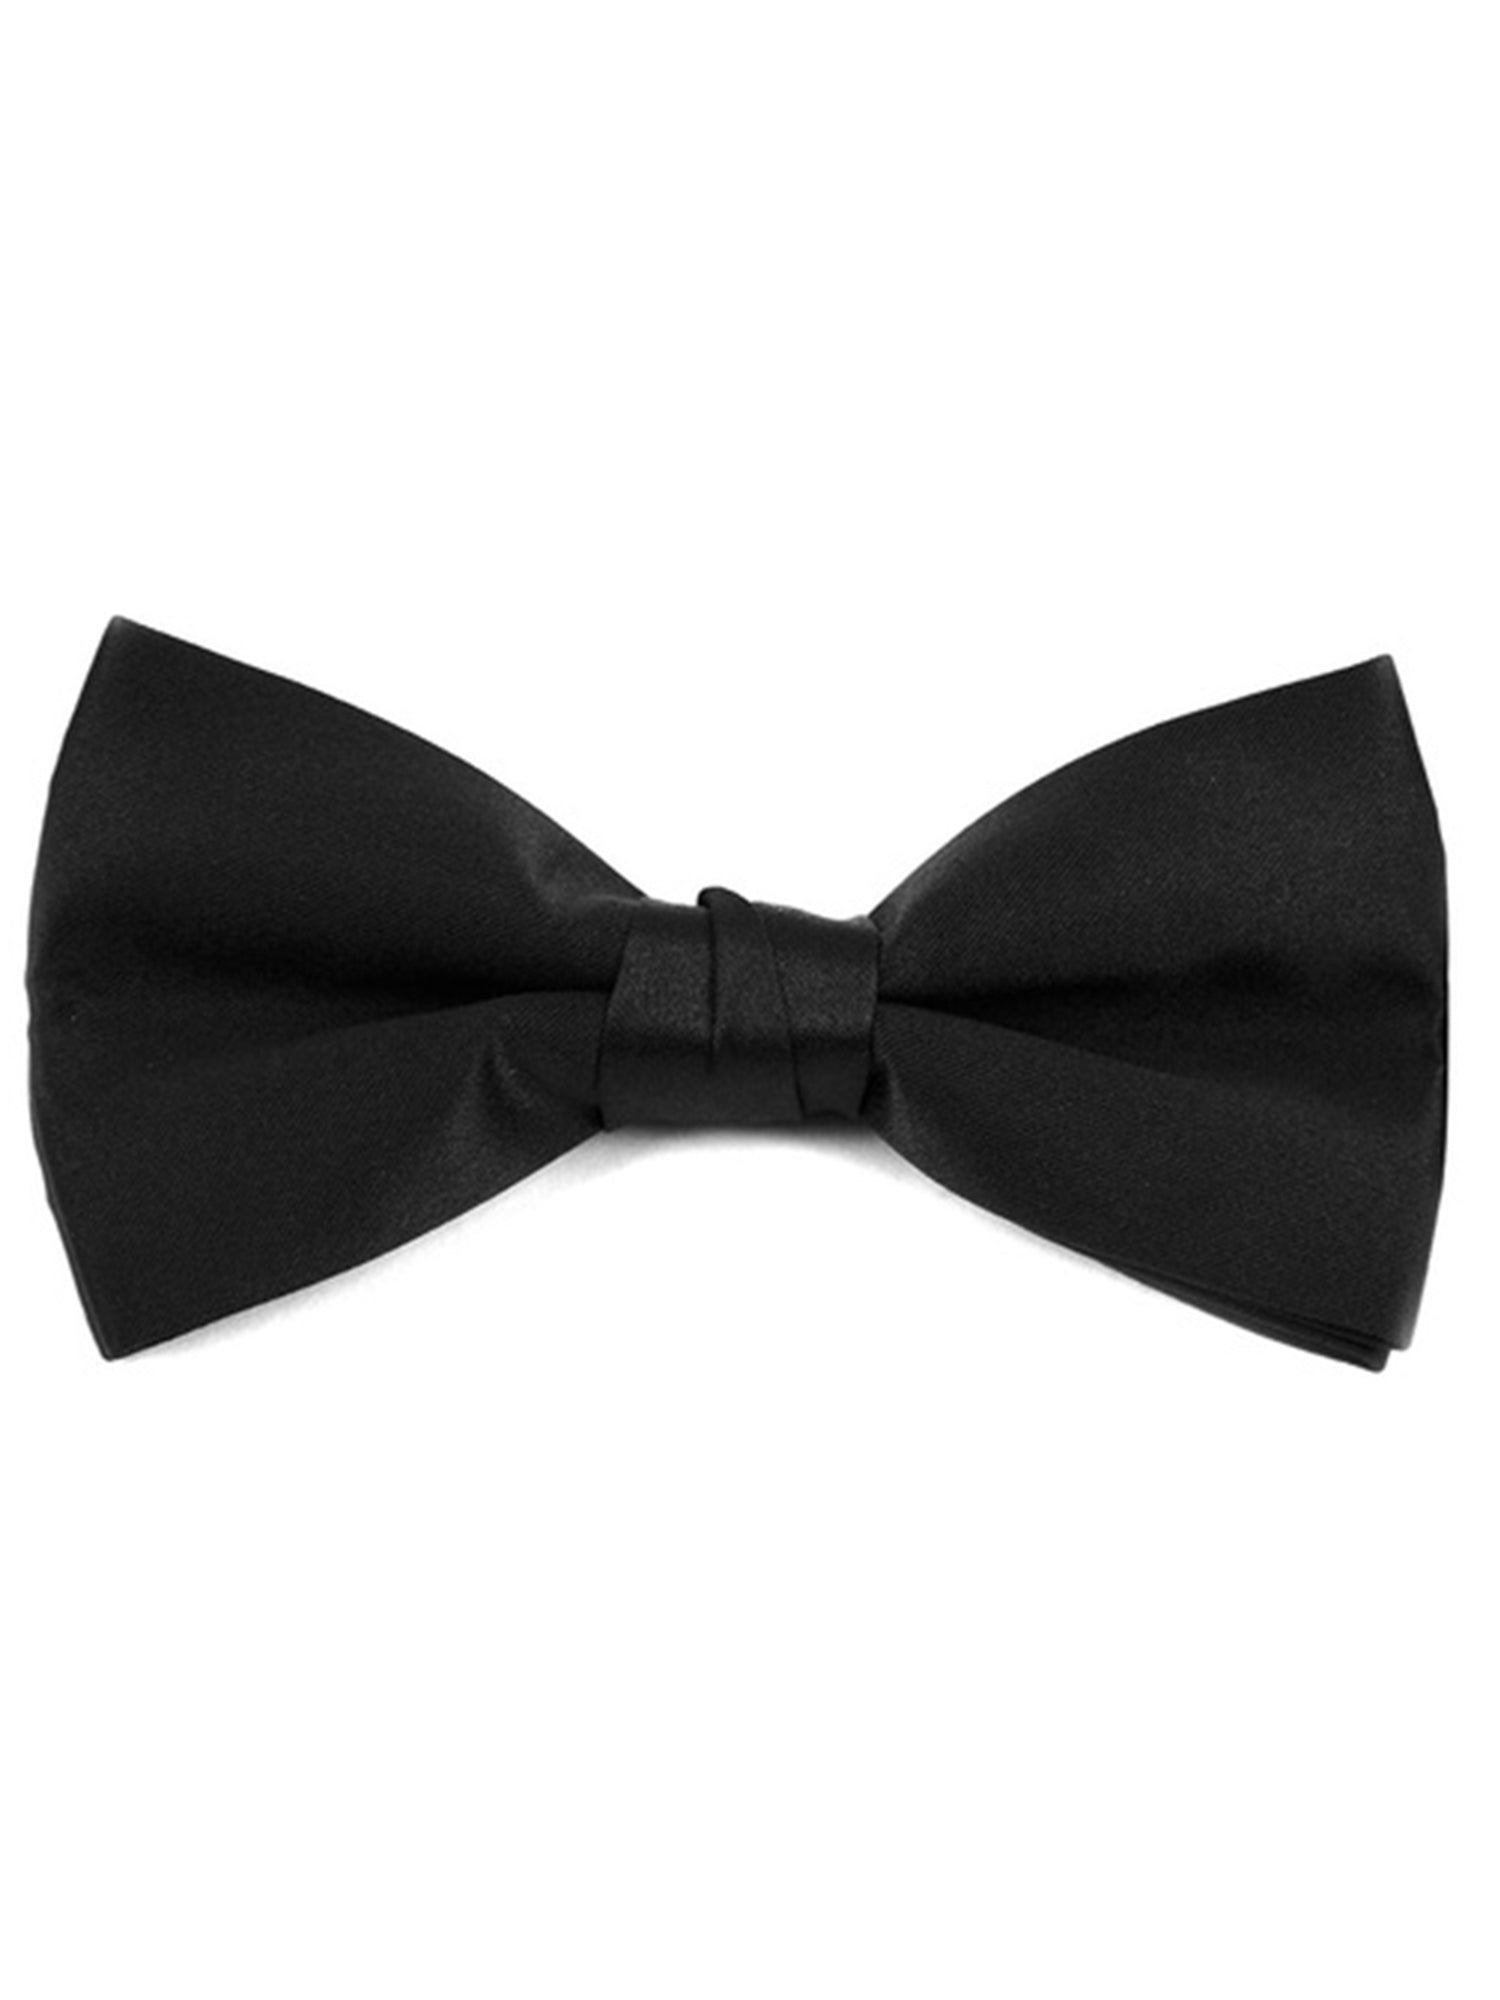 Young Boy's Pre-tied Adjustable Length Bow Tie - Formal Tuxedo Solid Color Boy's Solid Color Bow Tie TheDapperTie Black One Size 